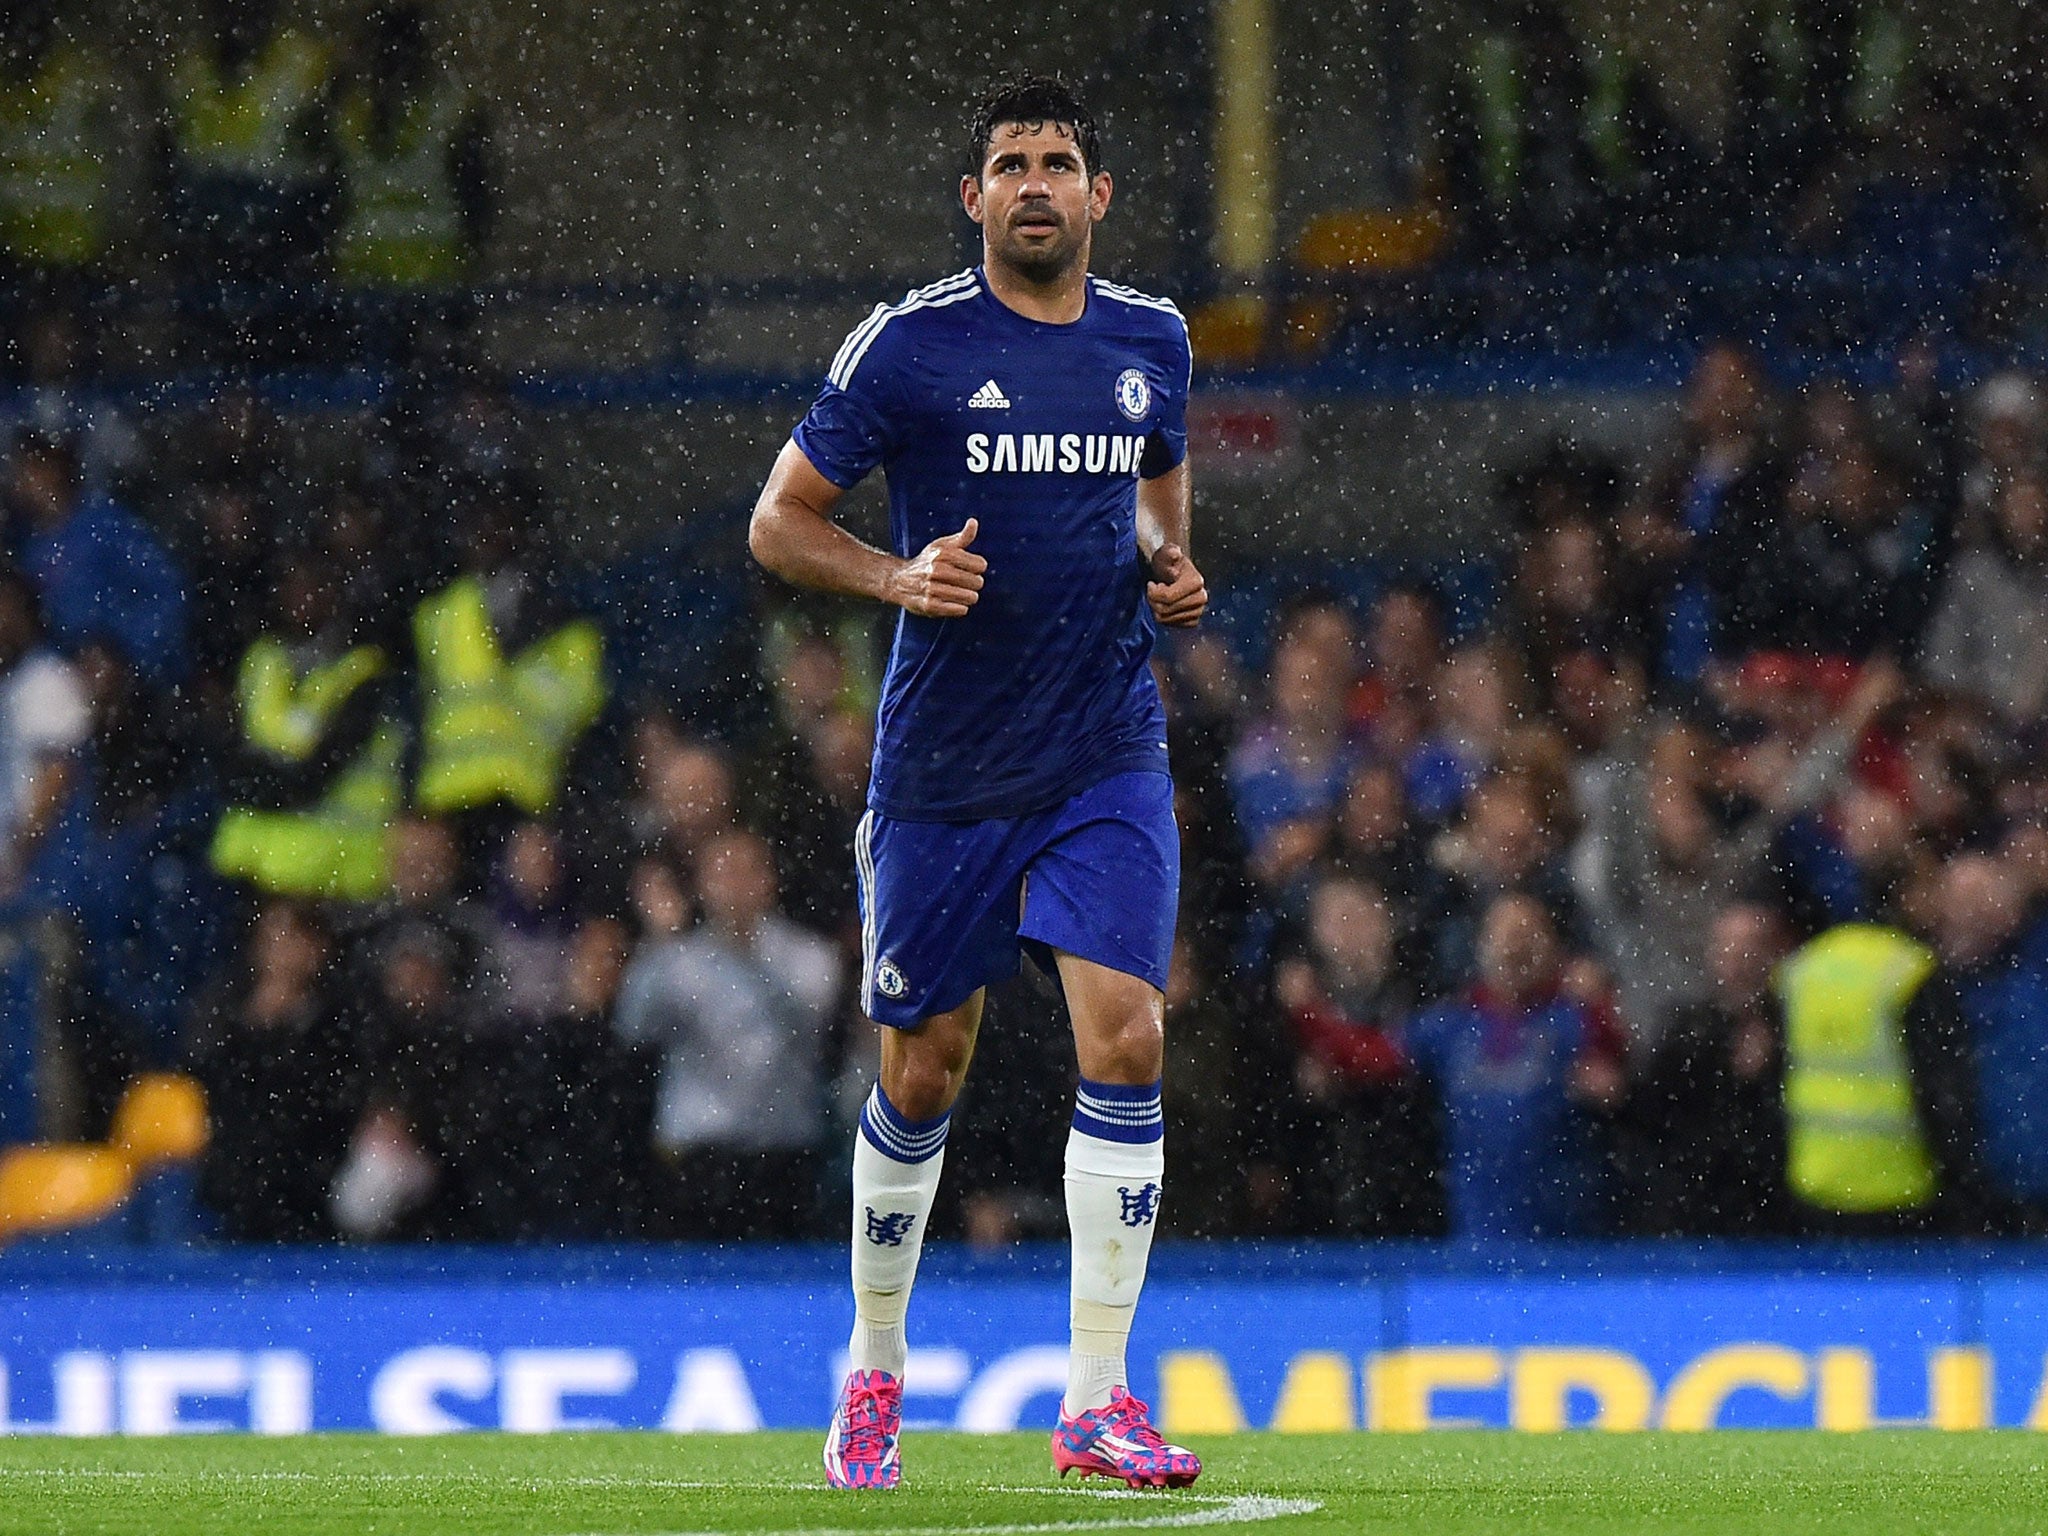 Jose Mourinho called Diego Costa 'a bargain' after seeing him score twice on his home debut